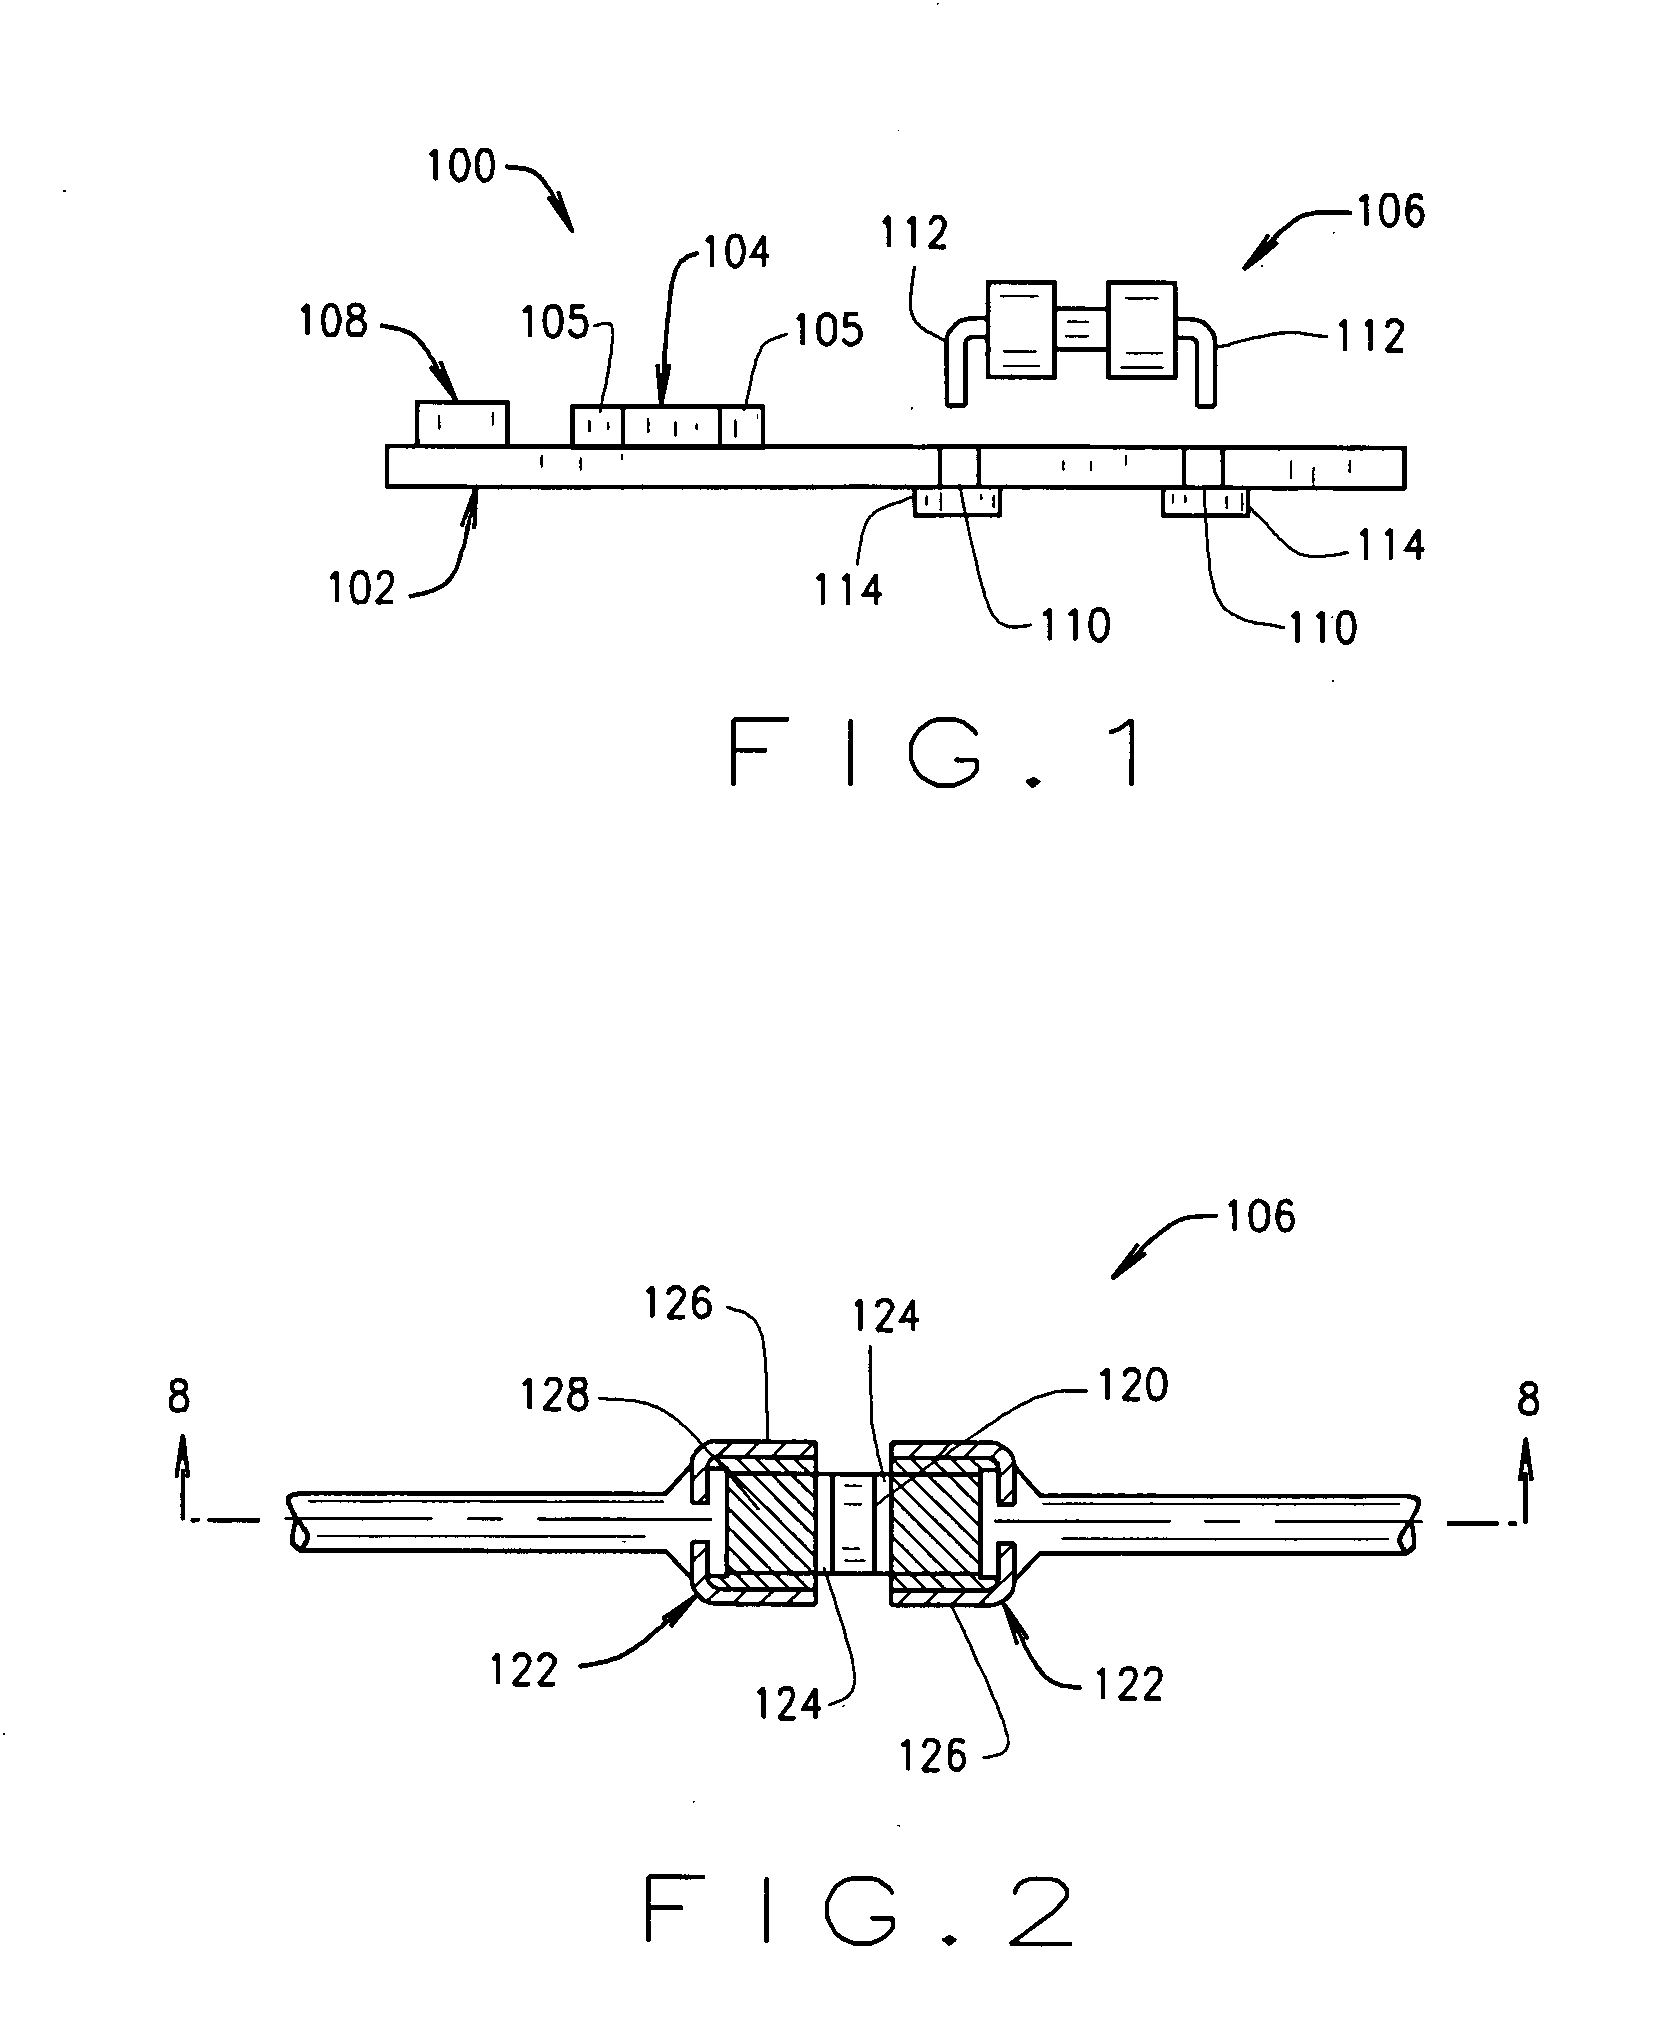 Hybrid chip fuse assembly having wire leads and fabrication method therefor